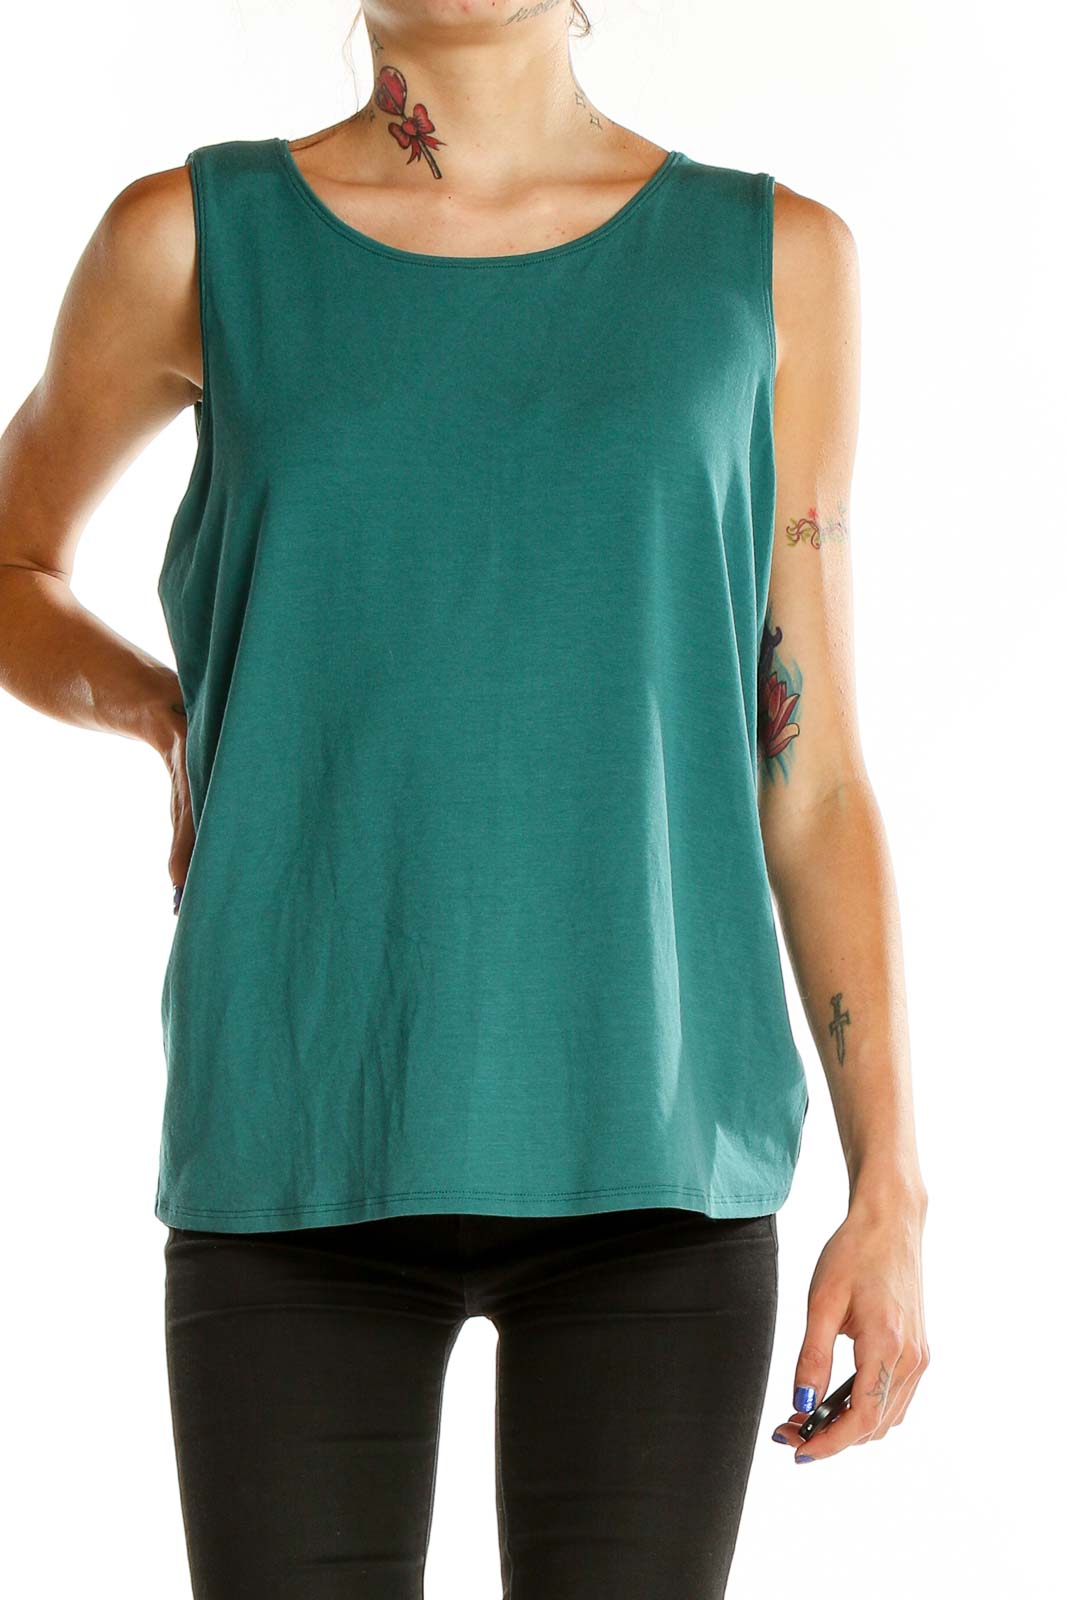 Green Casual Tank Top Front